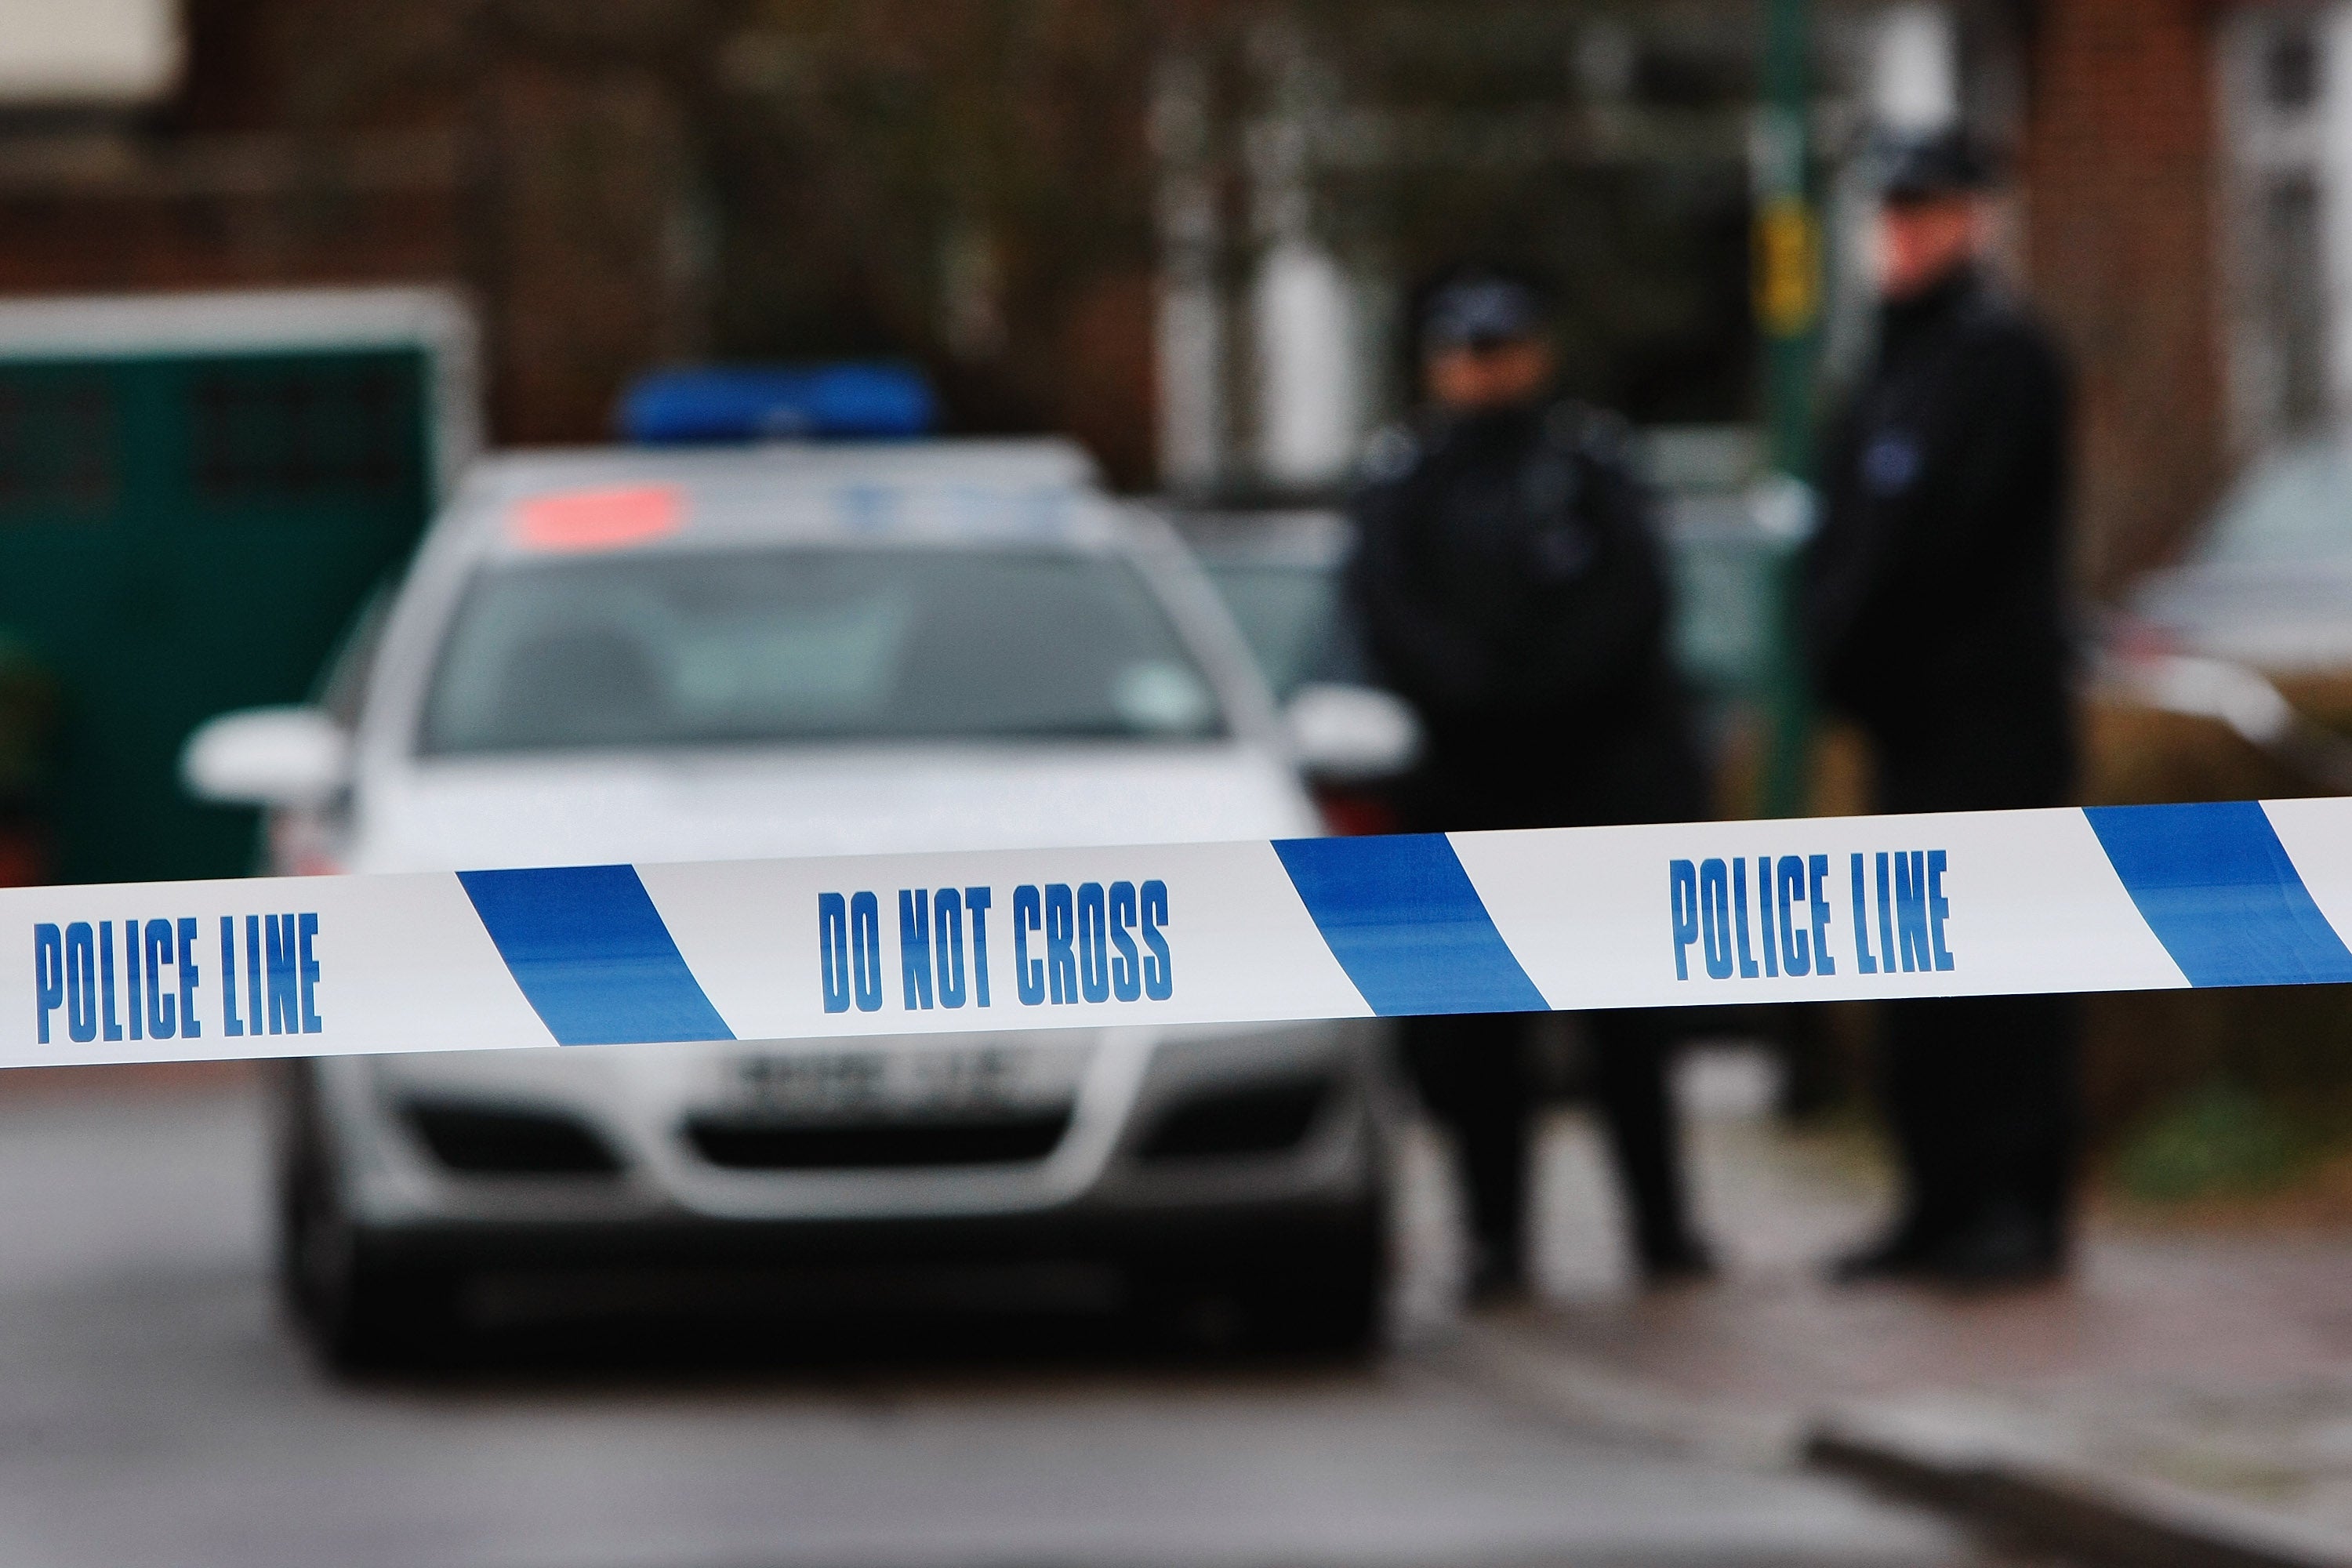 Police tape is pictured as police officers stand guard outside of a house in Edgeware on December 27, 2007 in London, England. A plastic surgeon is facing attempted murder charges in a stabbing incident.